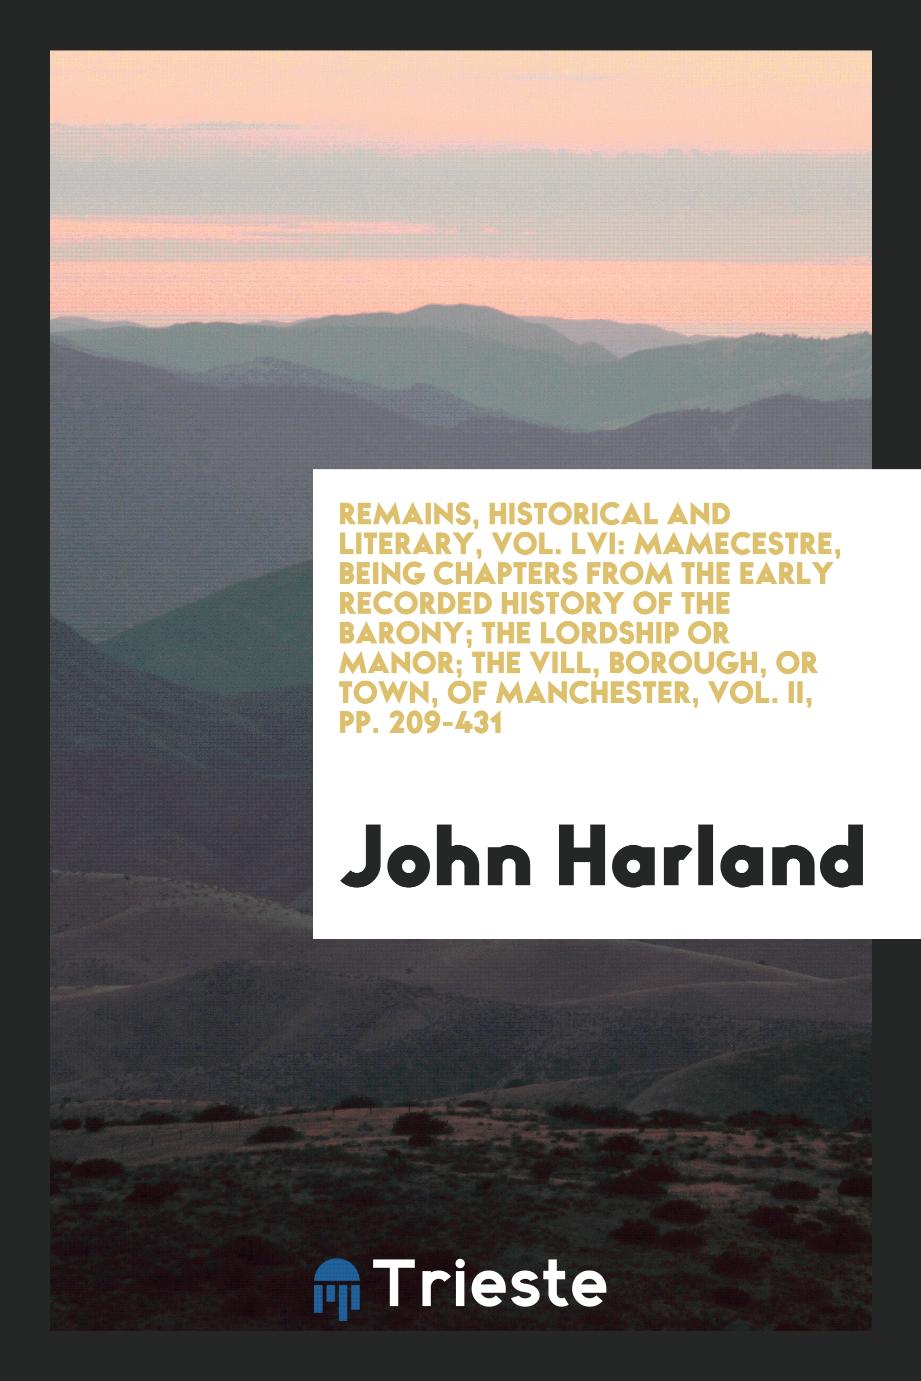 Remains, Historical and Literary, Vol. LVI: Mamecestre, Being Chapters from the Early Recorded History of the Barony; The Lordship or Manor; The Vill, Borough, or Town, of Manchester, Vol. II, pp. 209-431